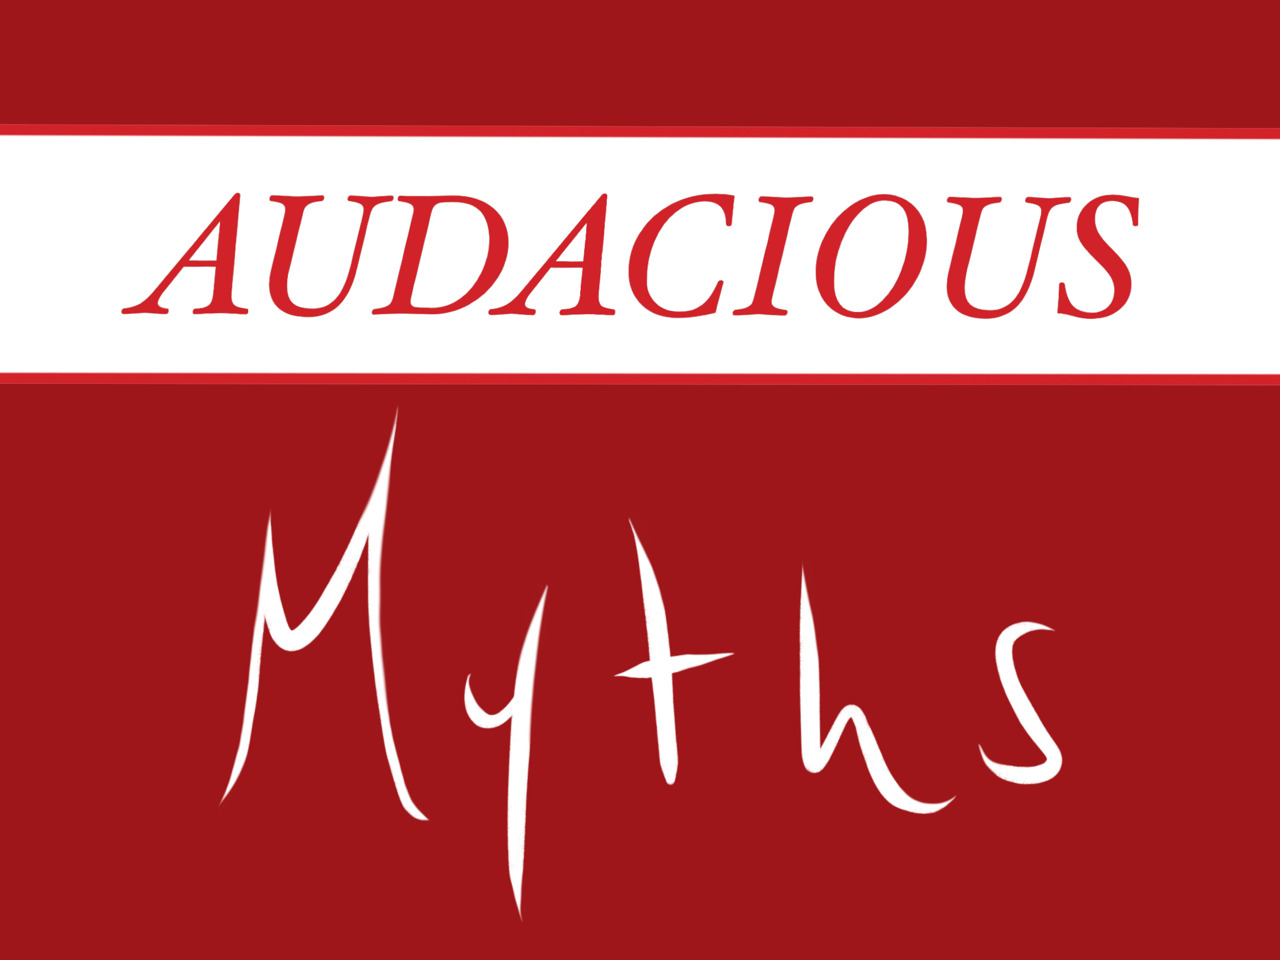 AUDACIOUS MYTHS: Testosterone, Pain, and Brown Recluse Spiders